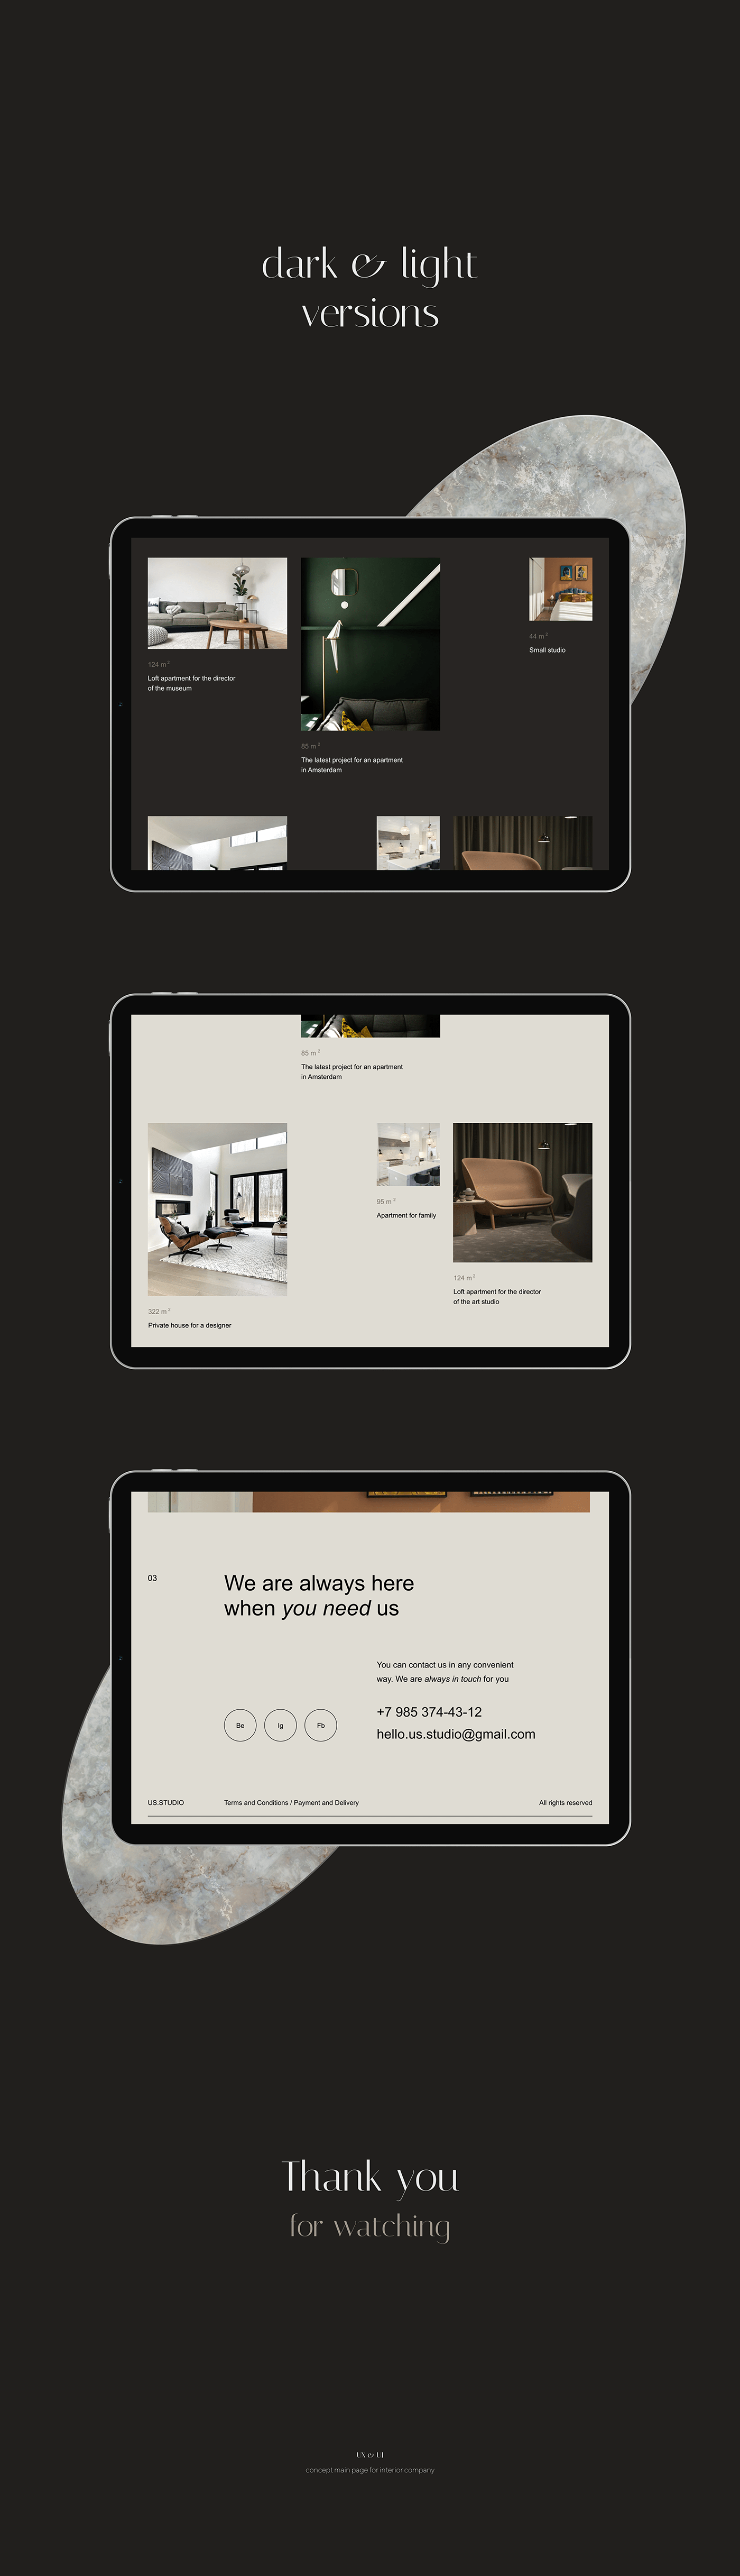 architecture exterior house Interface Interior landing page mobile UI/UX Web Website